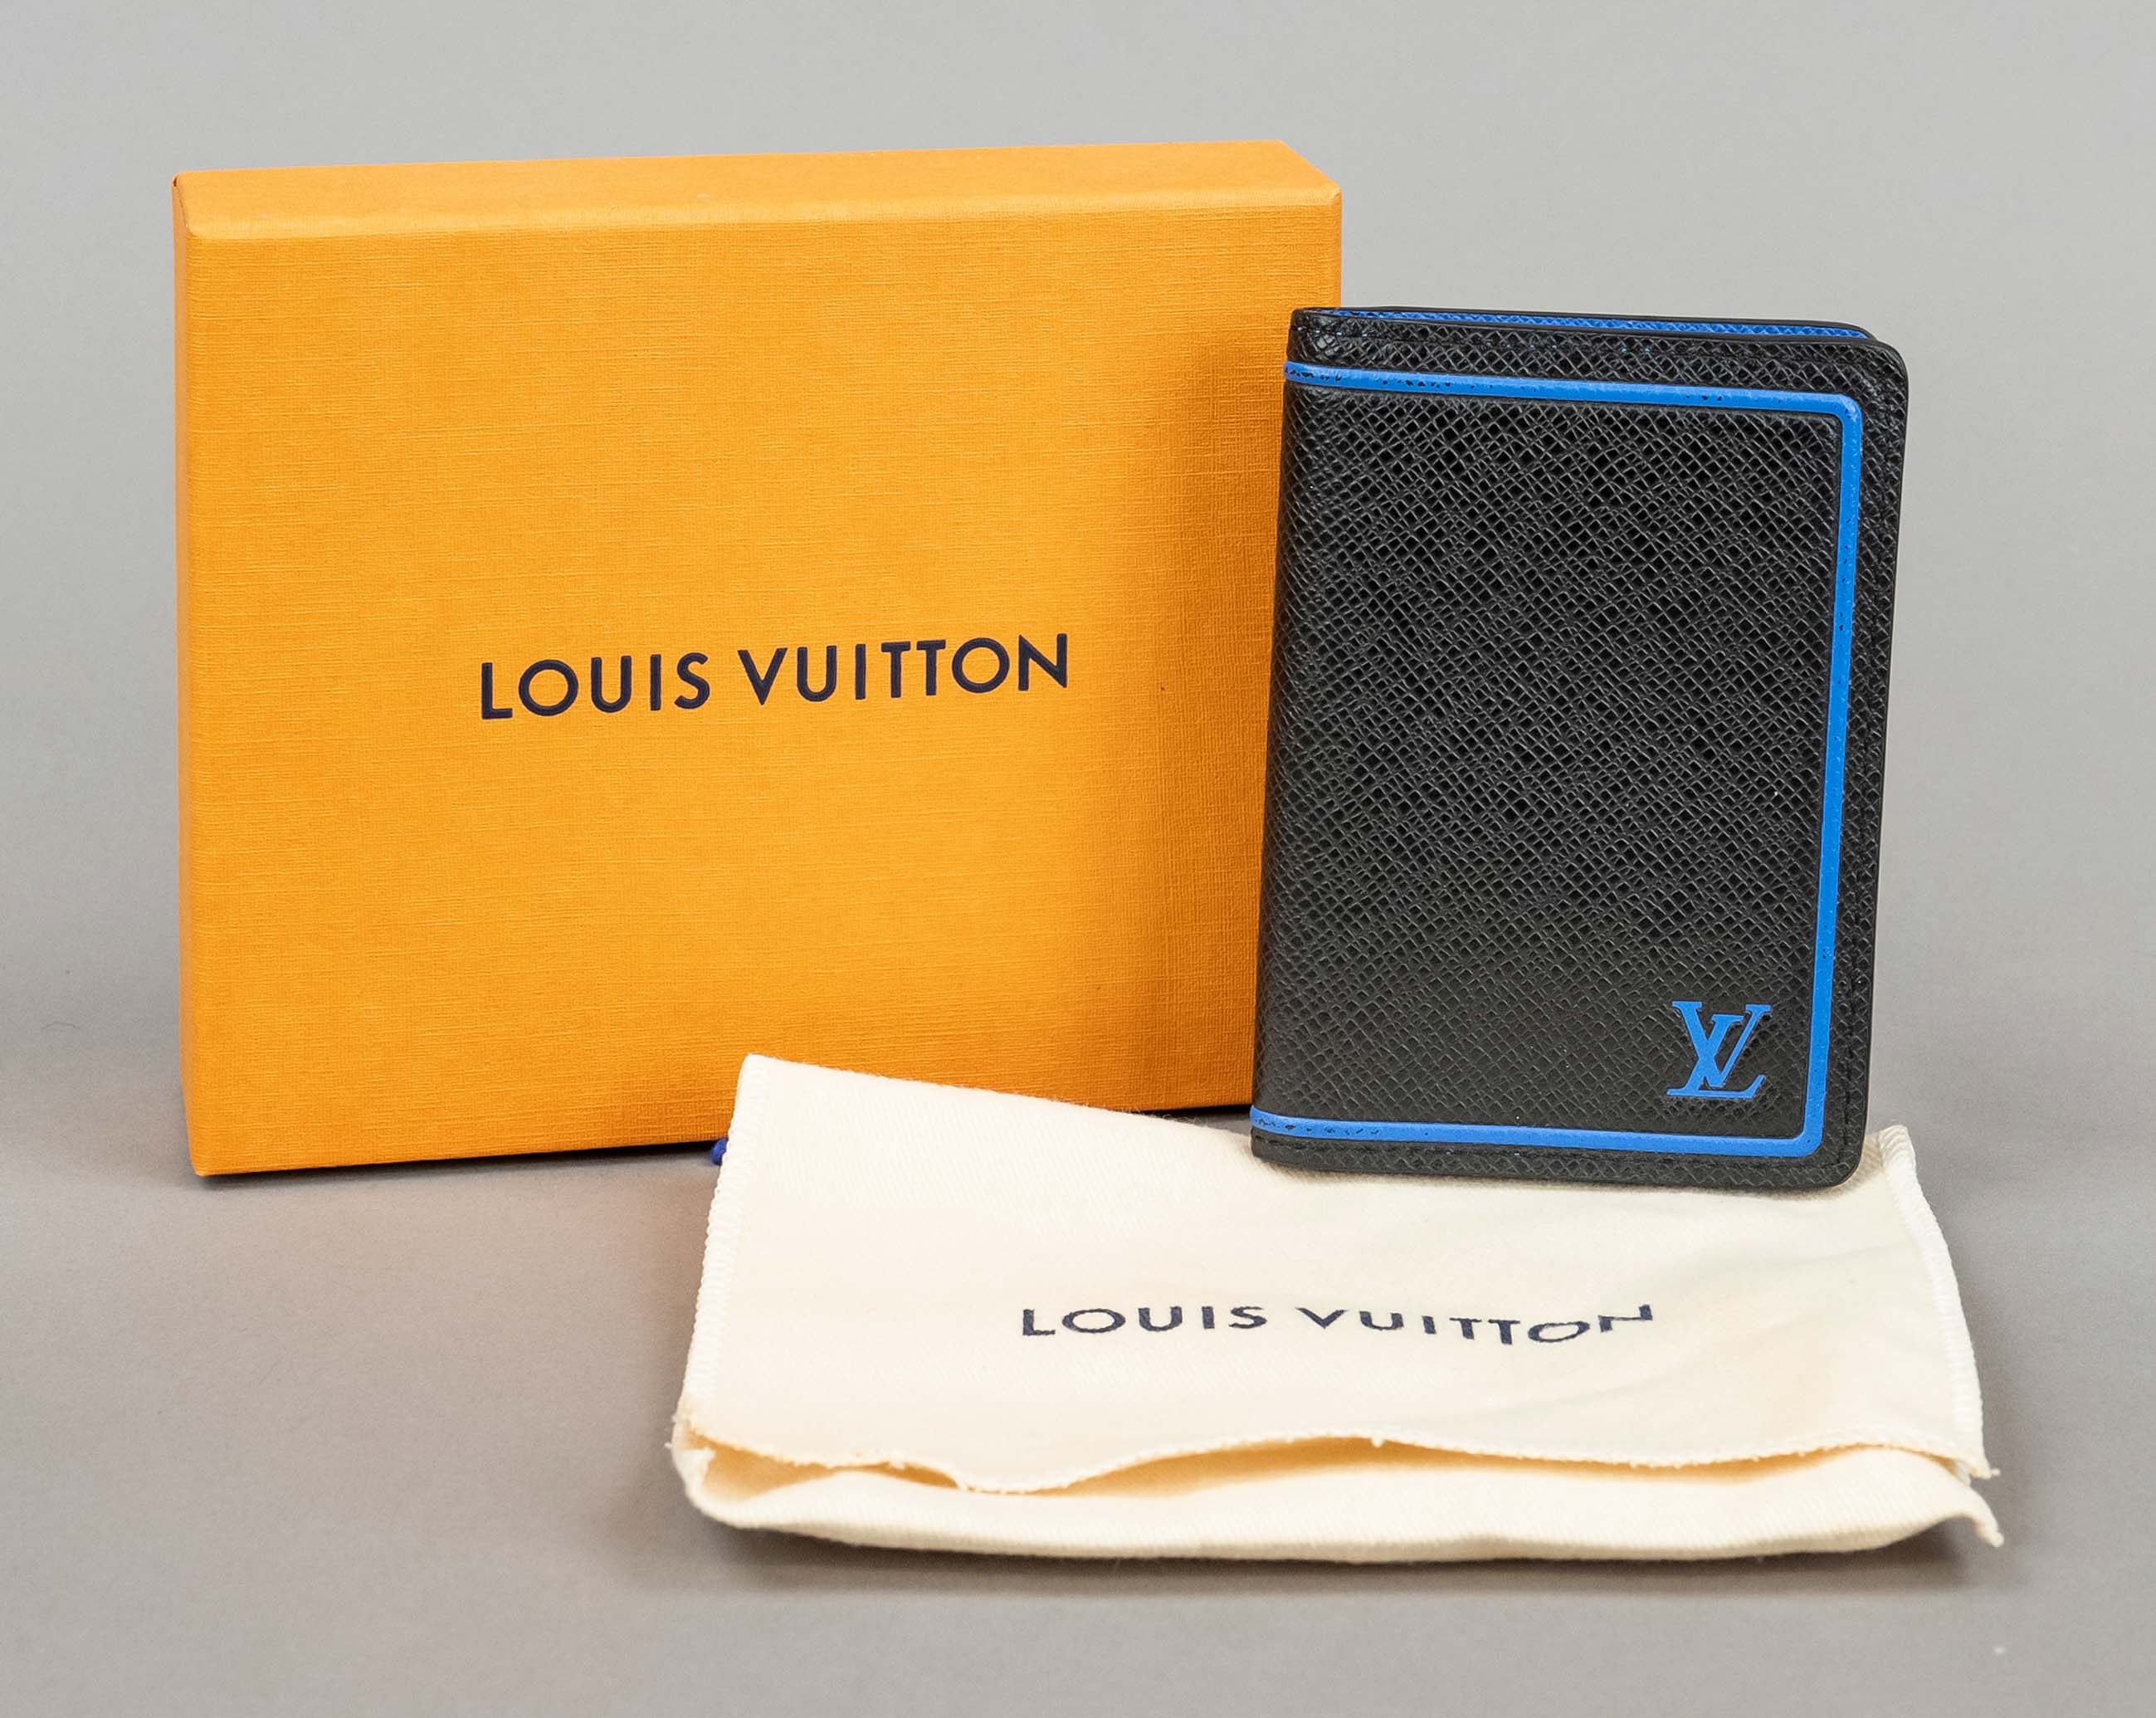 Louis Vuitton, card case, dark grey textured leather, set off with royal blue trim and embossed